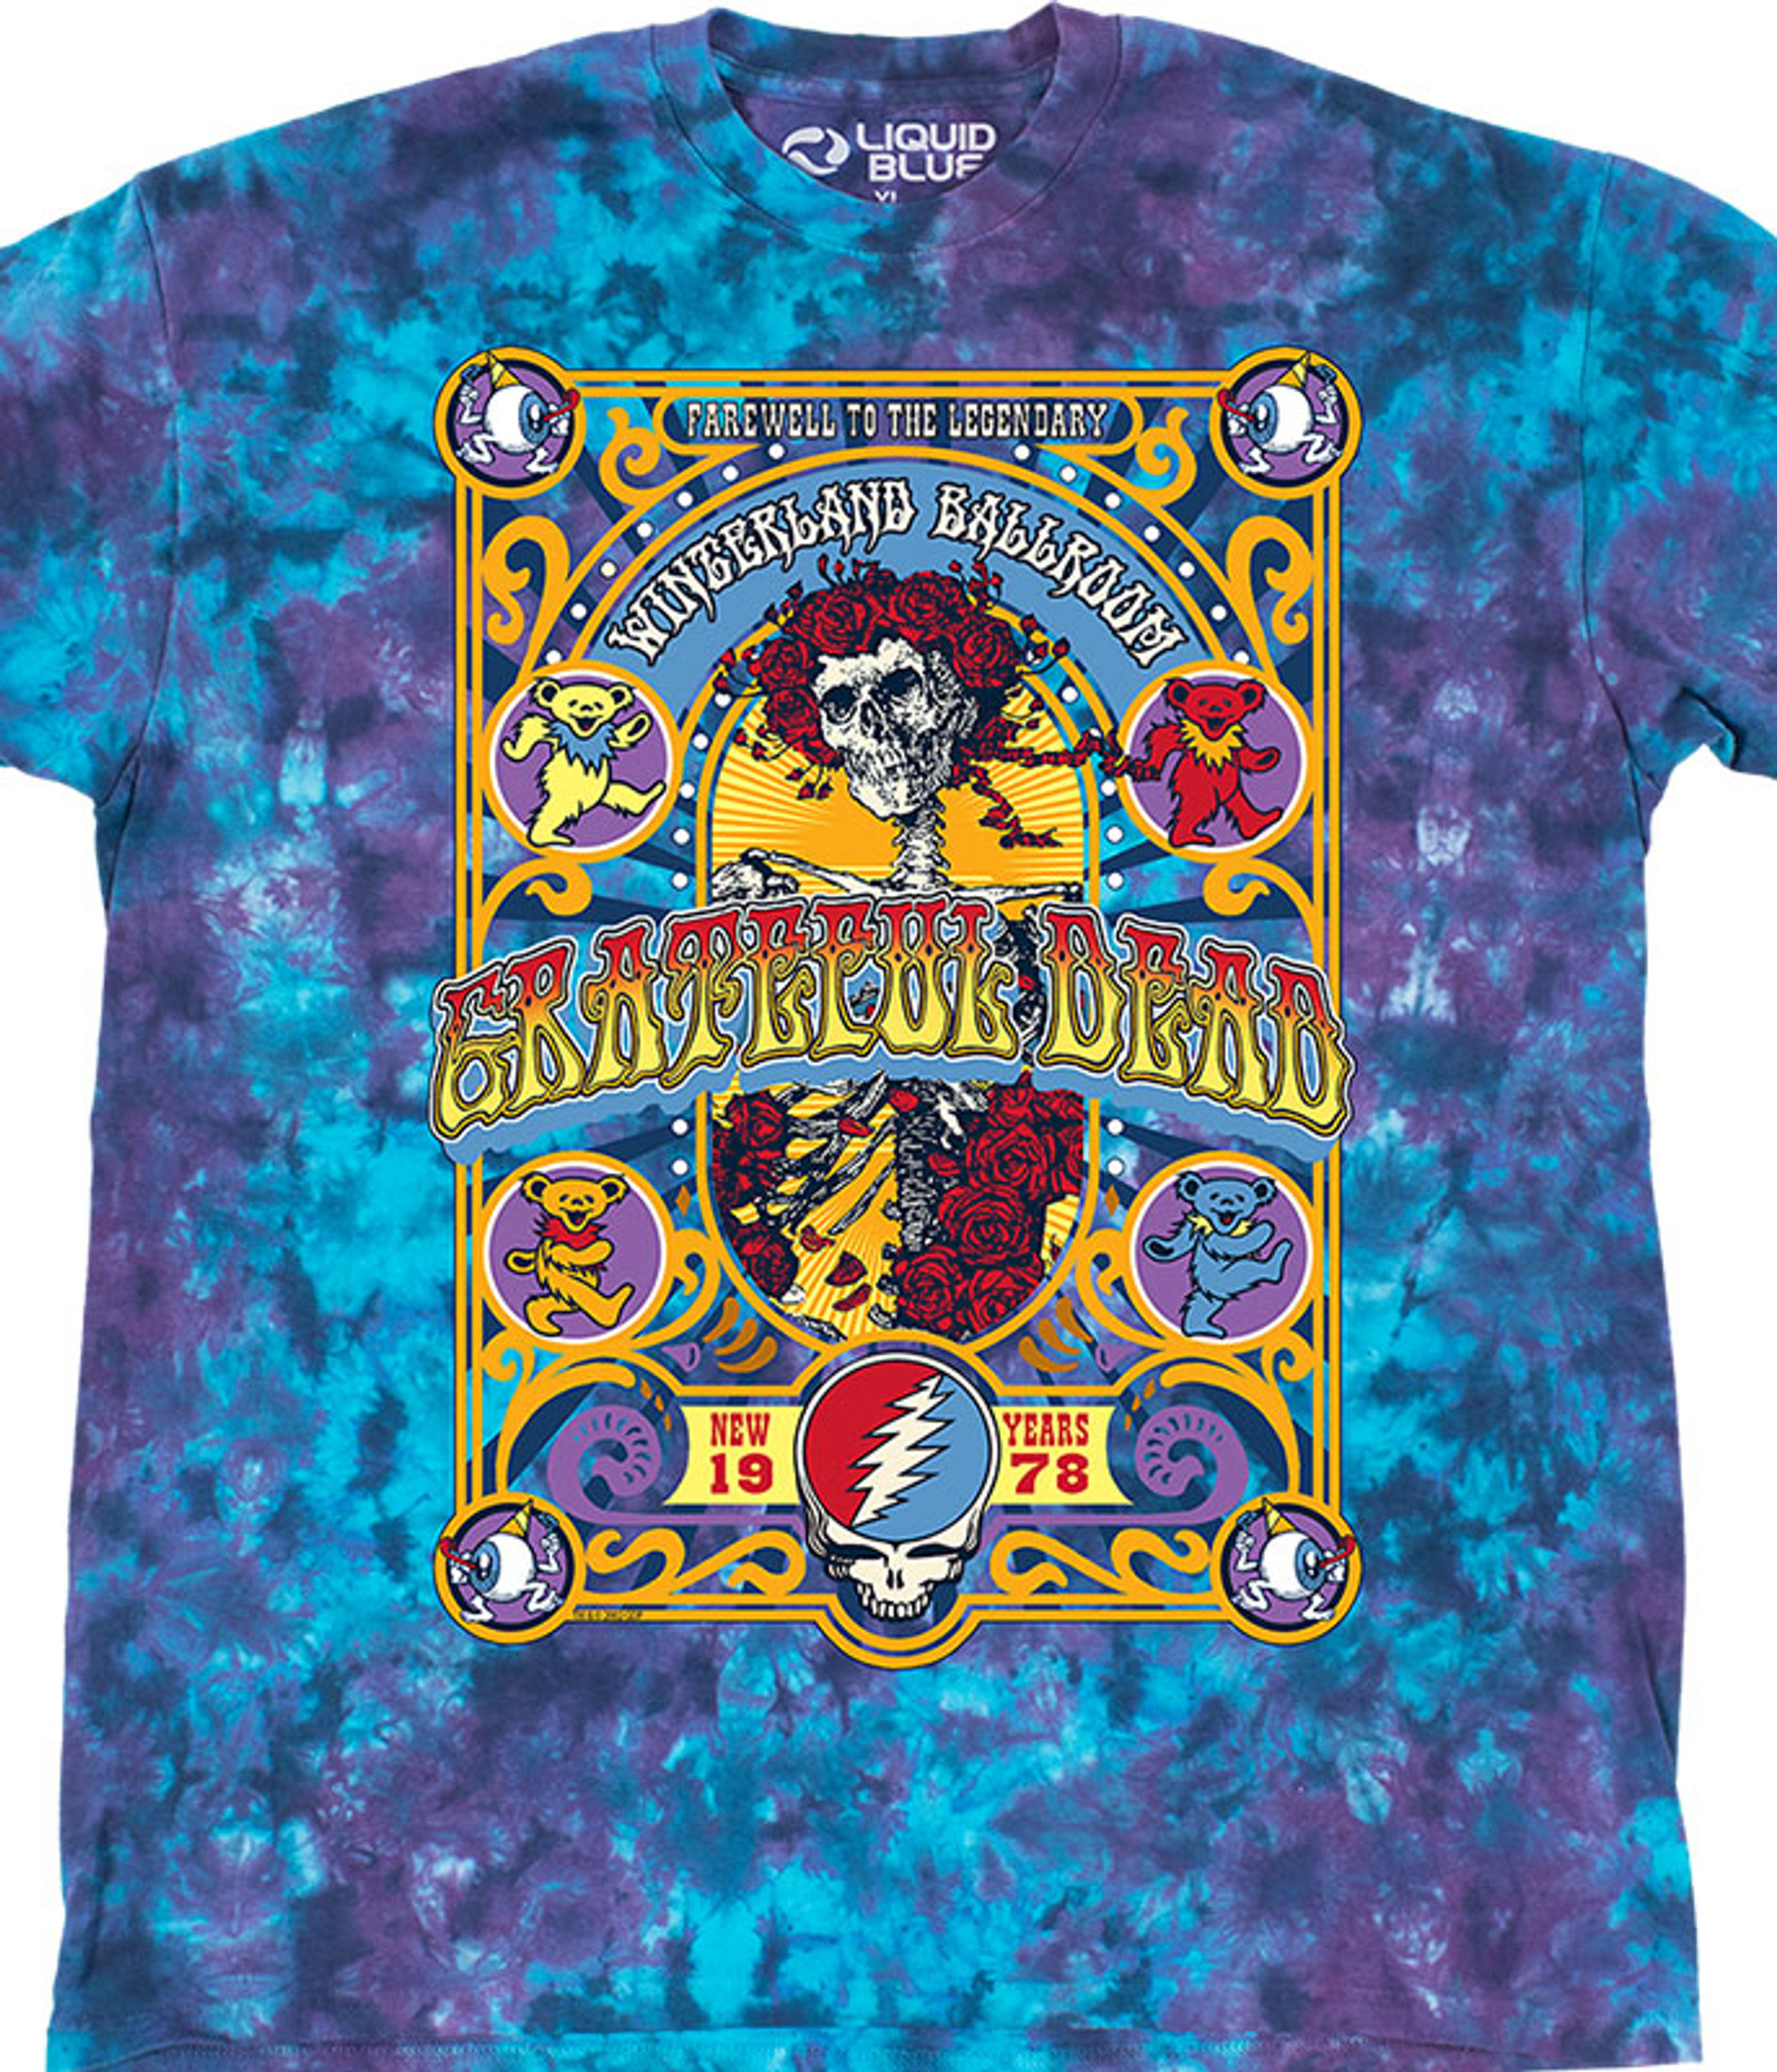 MLB x Grateful Dead x Twins T-Shirt from Homage. | Light Blue | Vintage Apparel from Homage.